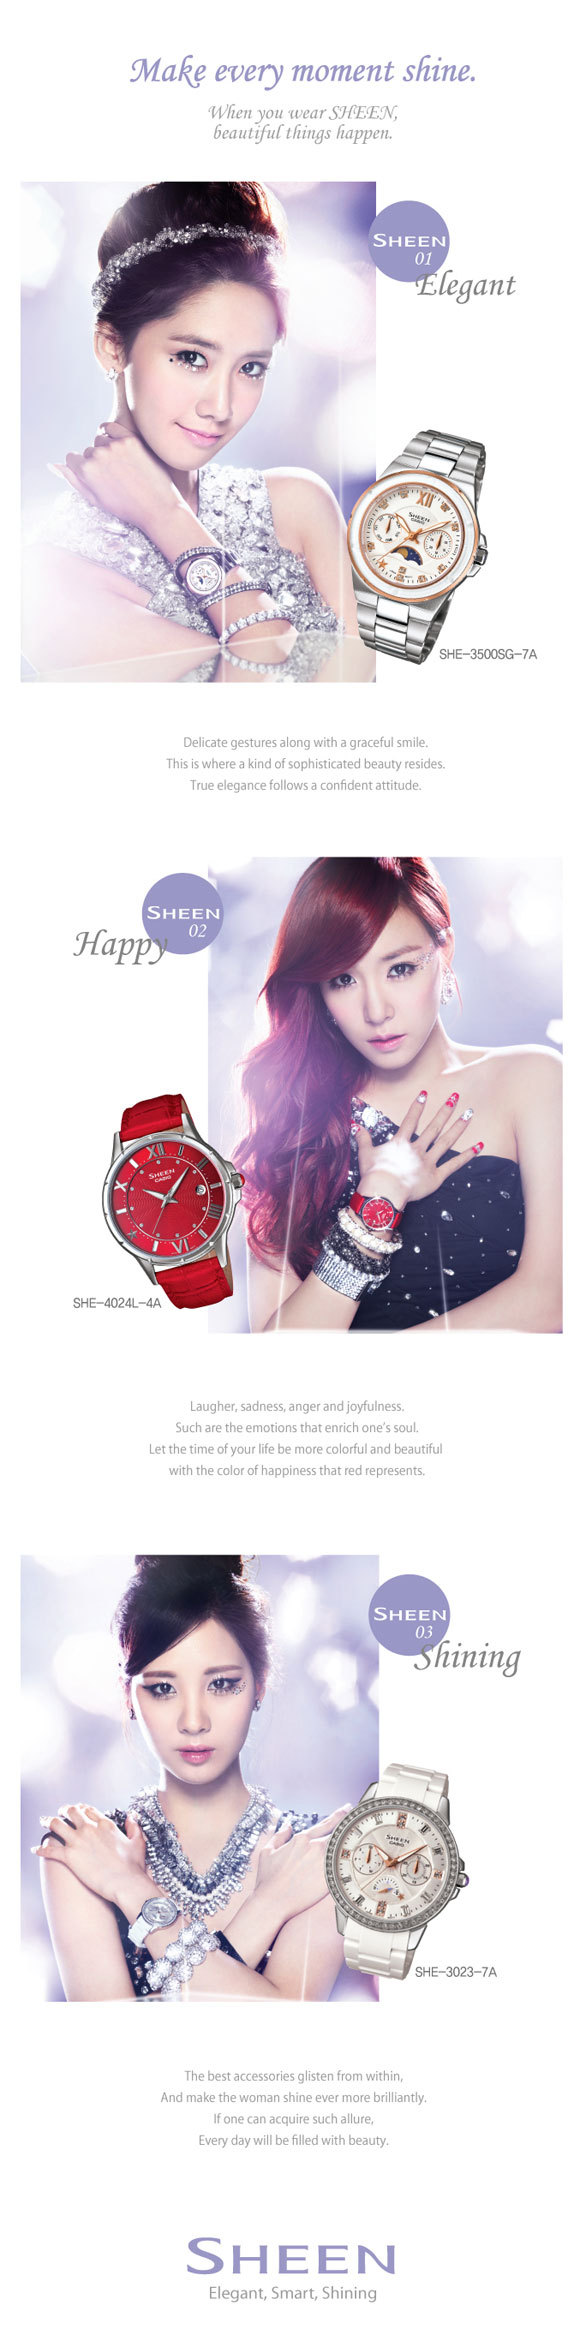 Tiffany, Yoona Seohyun @ Casio Sheen Promotion Pictures HD 1304F448500CE06F0CF57B